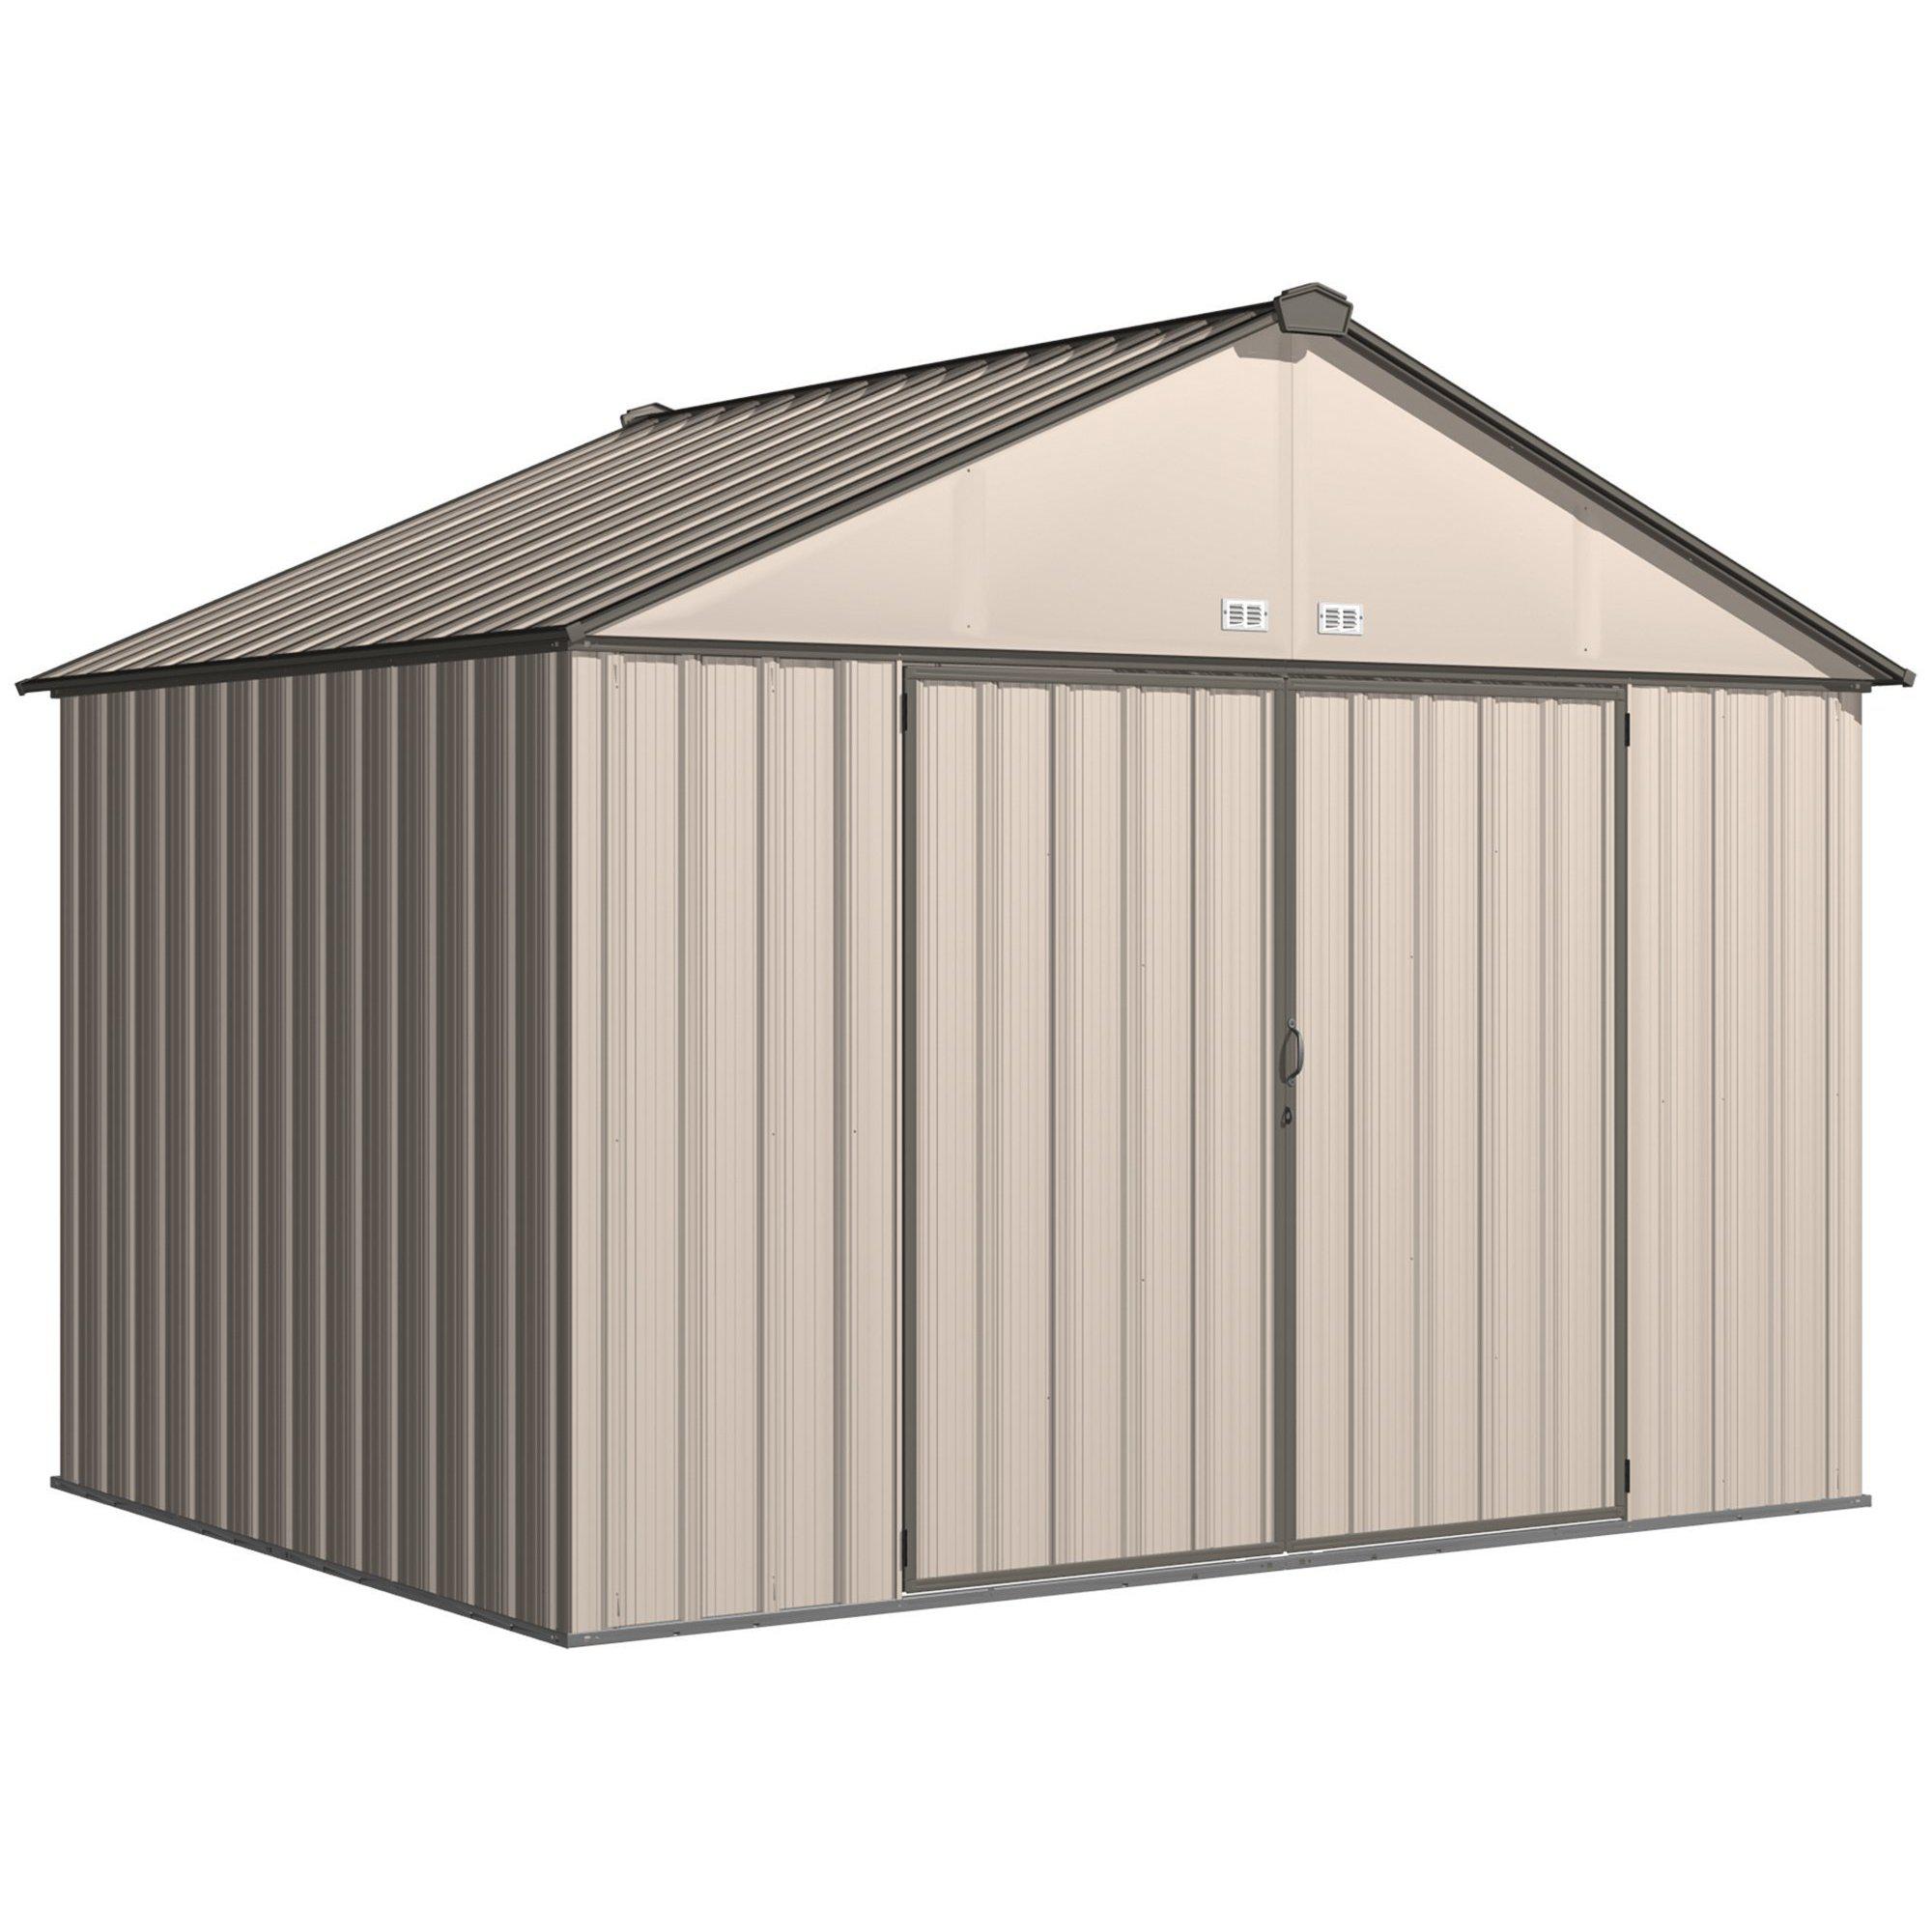 Arrow EZEE Shed Extra High Gable Steel Storage Shed, Cream/Charcoal Trim, 10 x 8 ft.